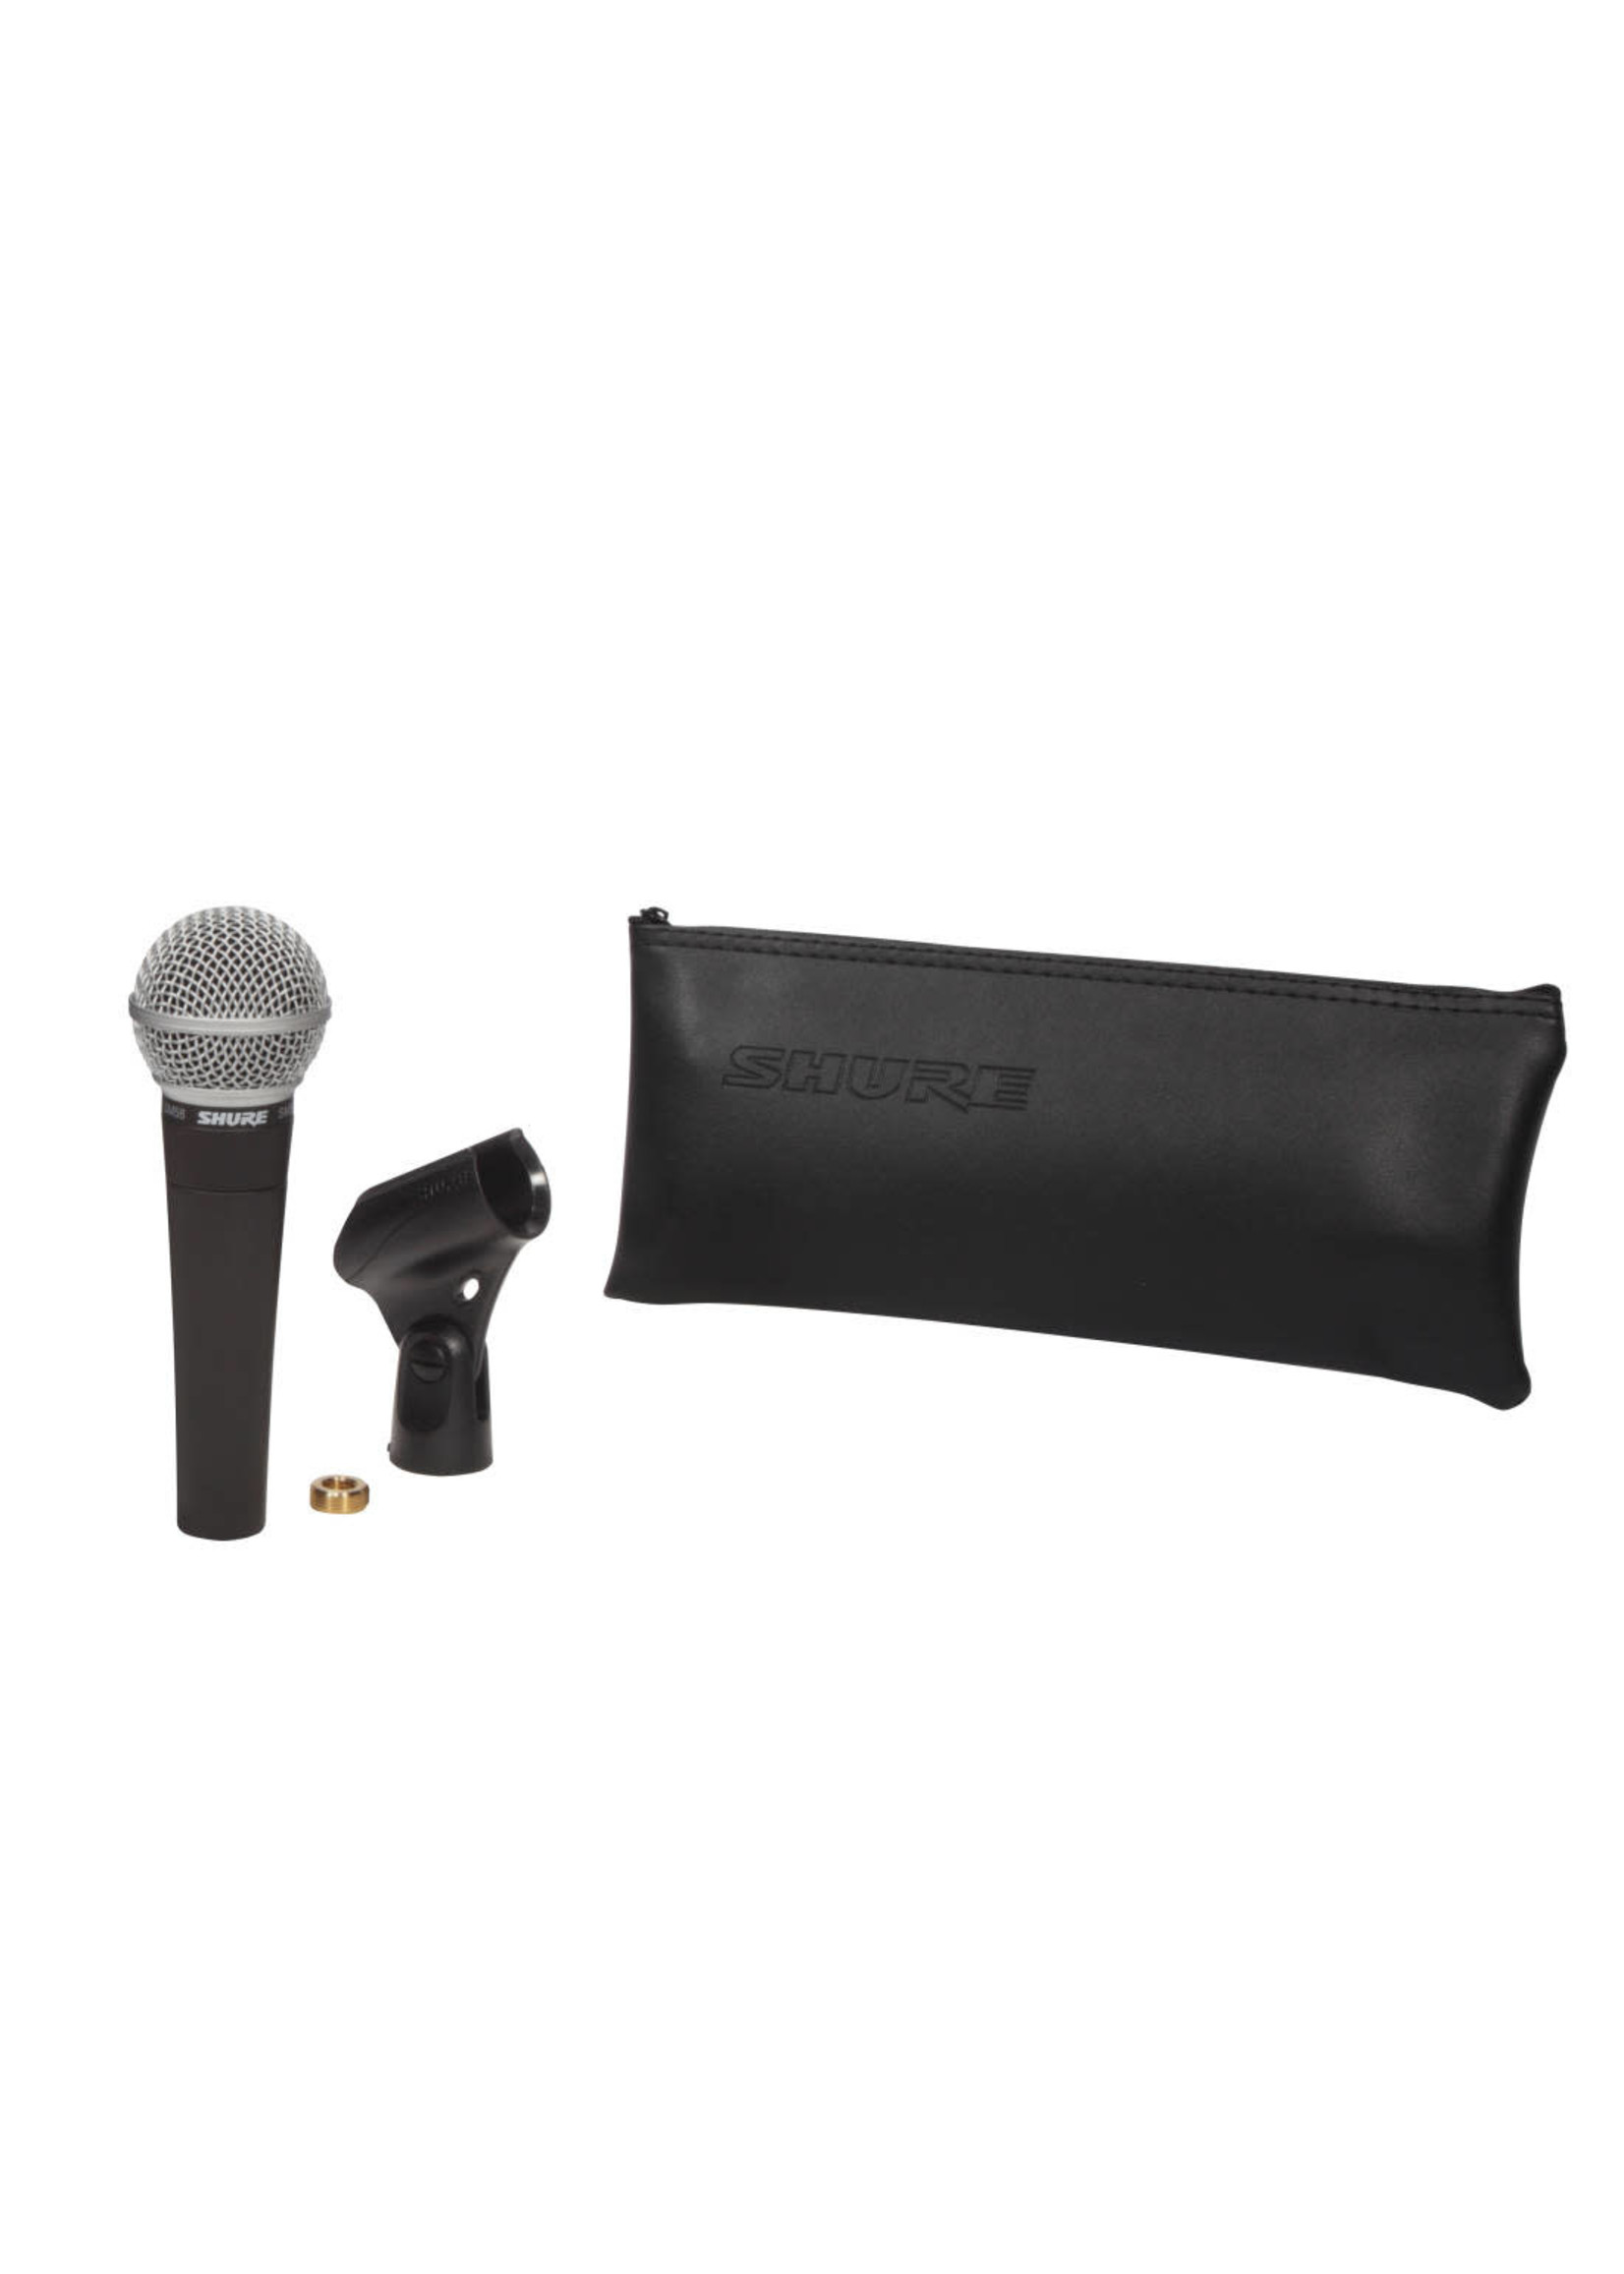 Shure Shure SM58 Unidirectional/Cardioid Dynamic Microphone